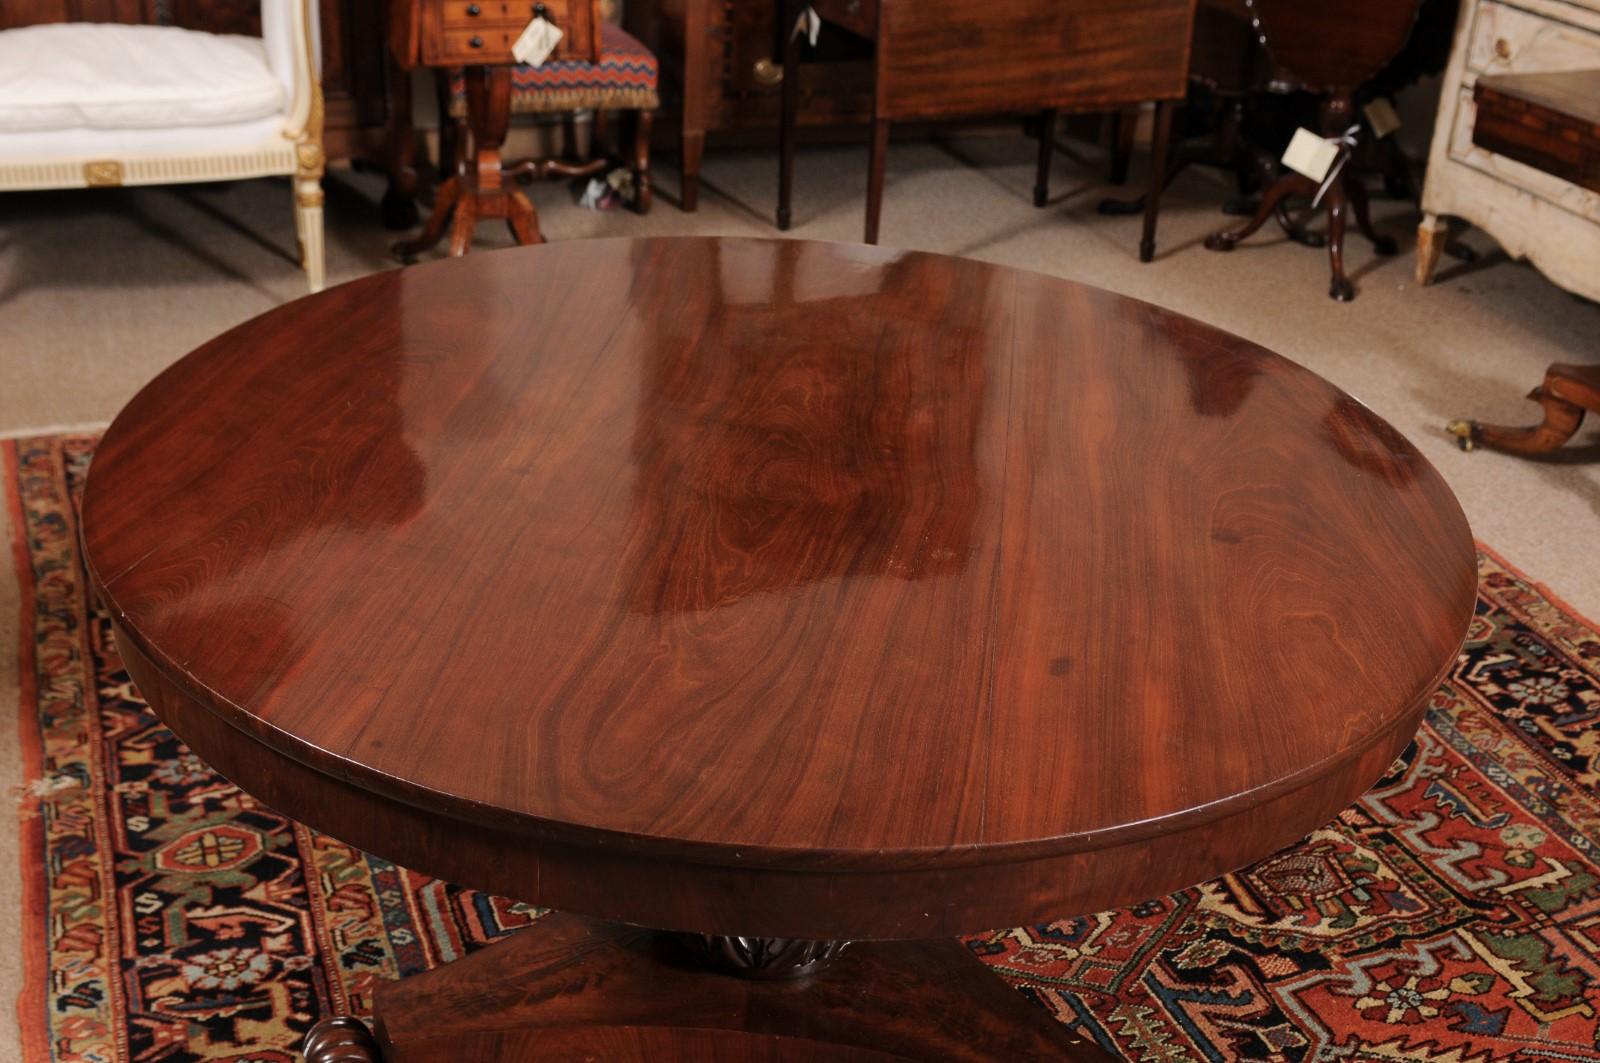  19th Century English Mahogany Center Table with Pedestal Base & Scroll Feet For Sale 3